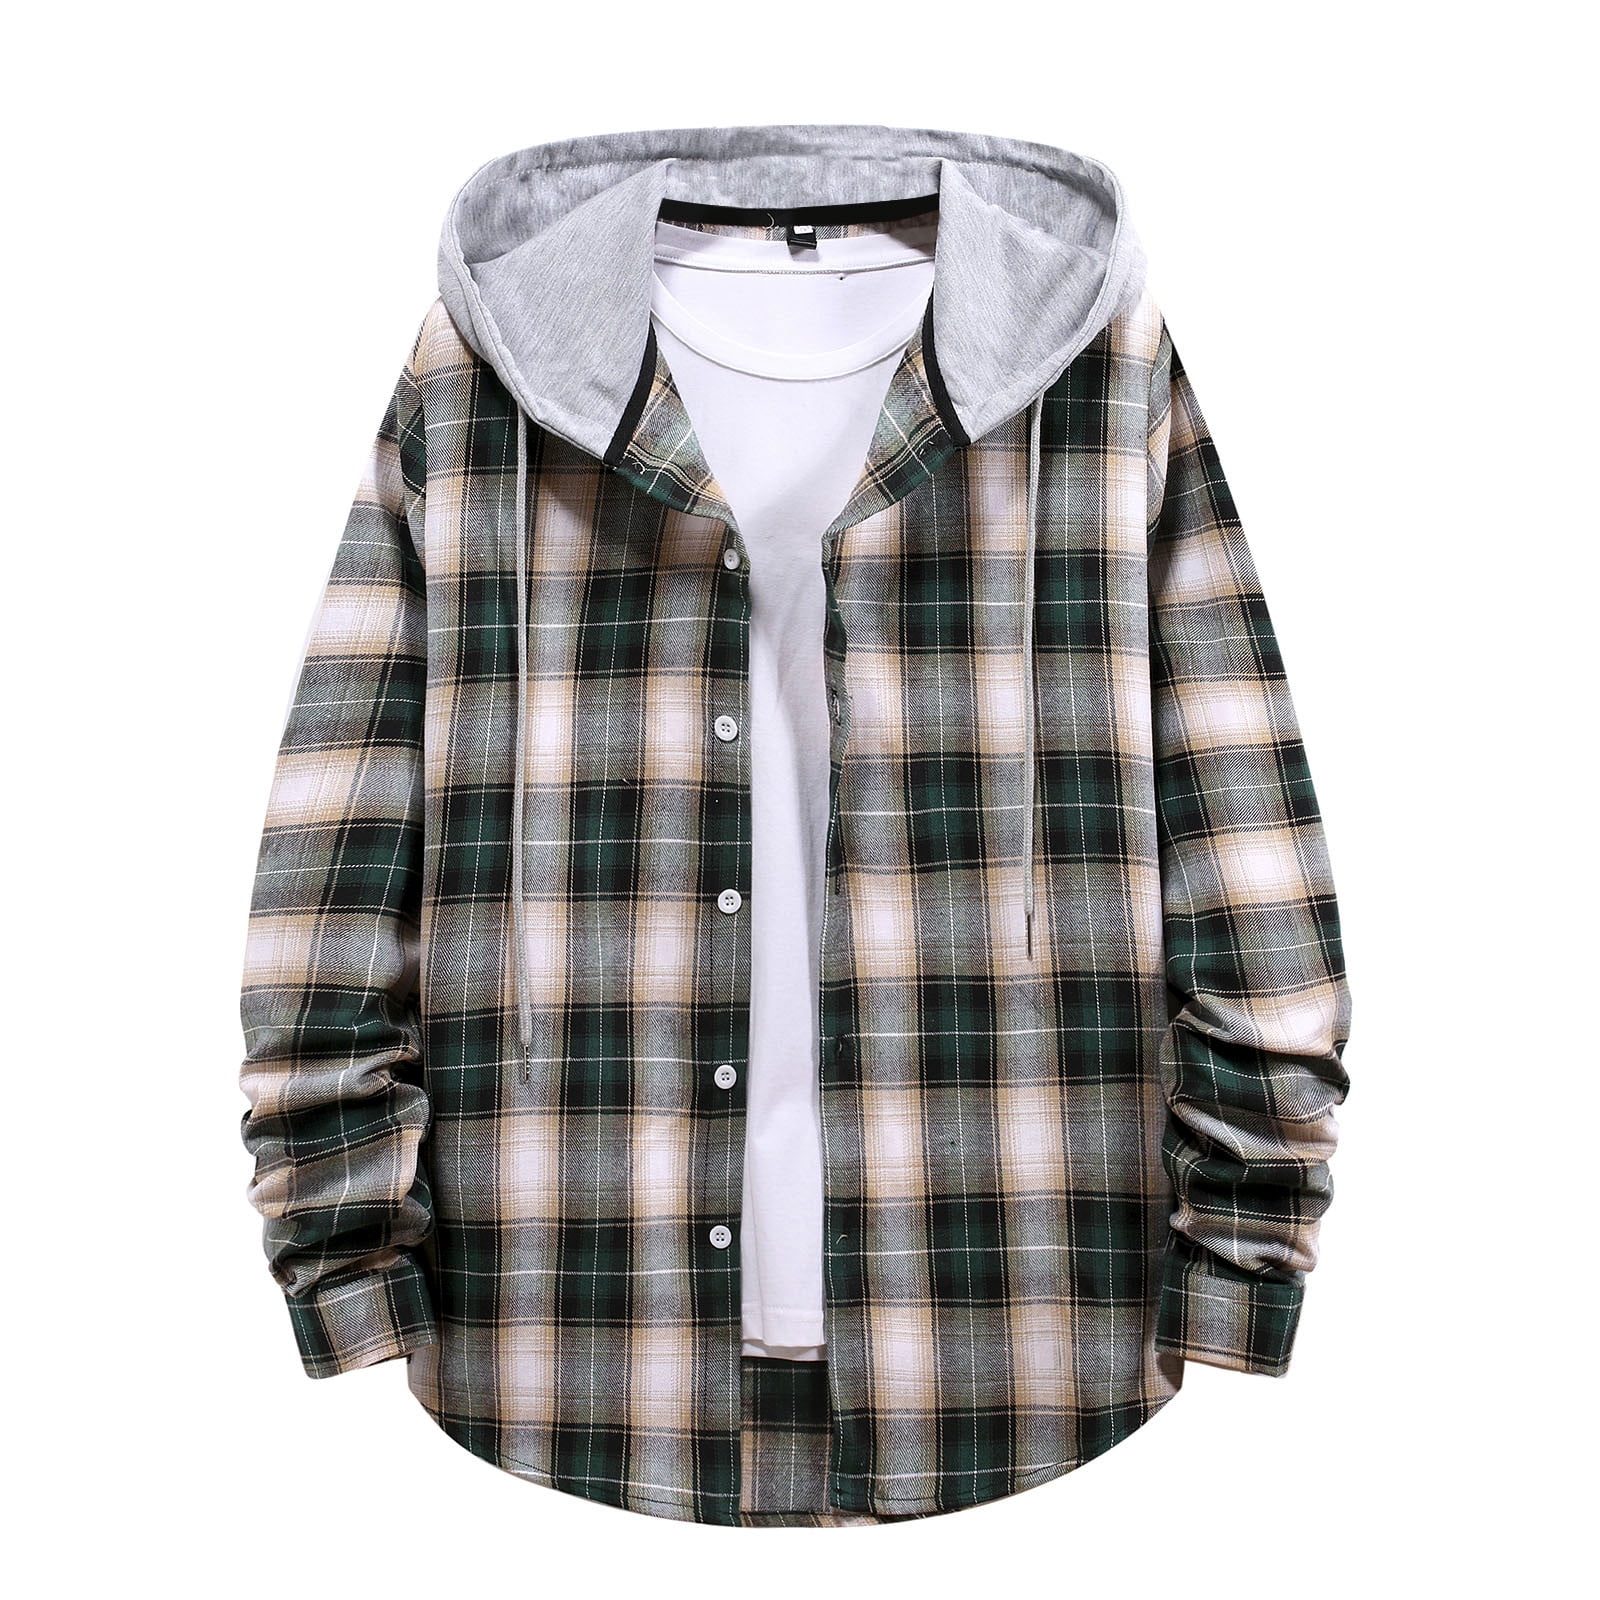 DDAPJ pyju Mens Casual Button Down Shirt Jackets on Clearance,Hooded ...